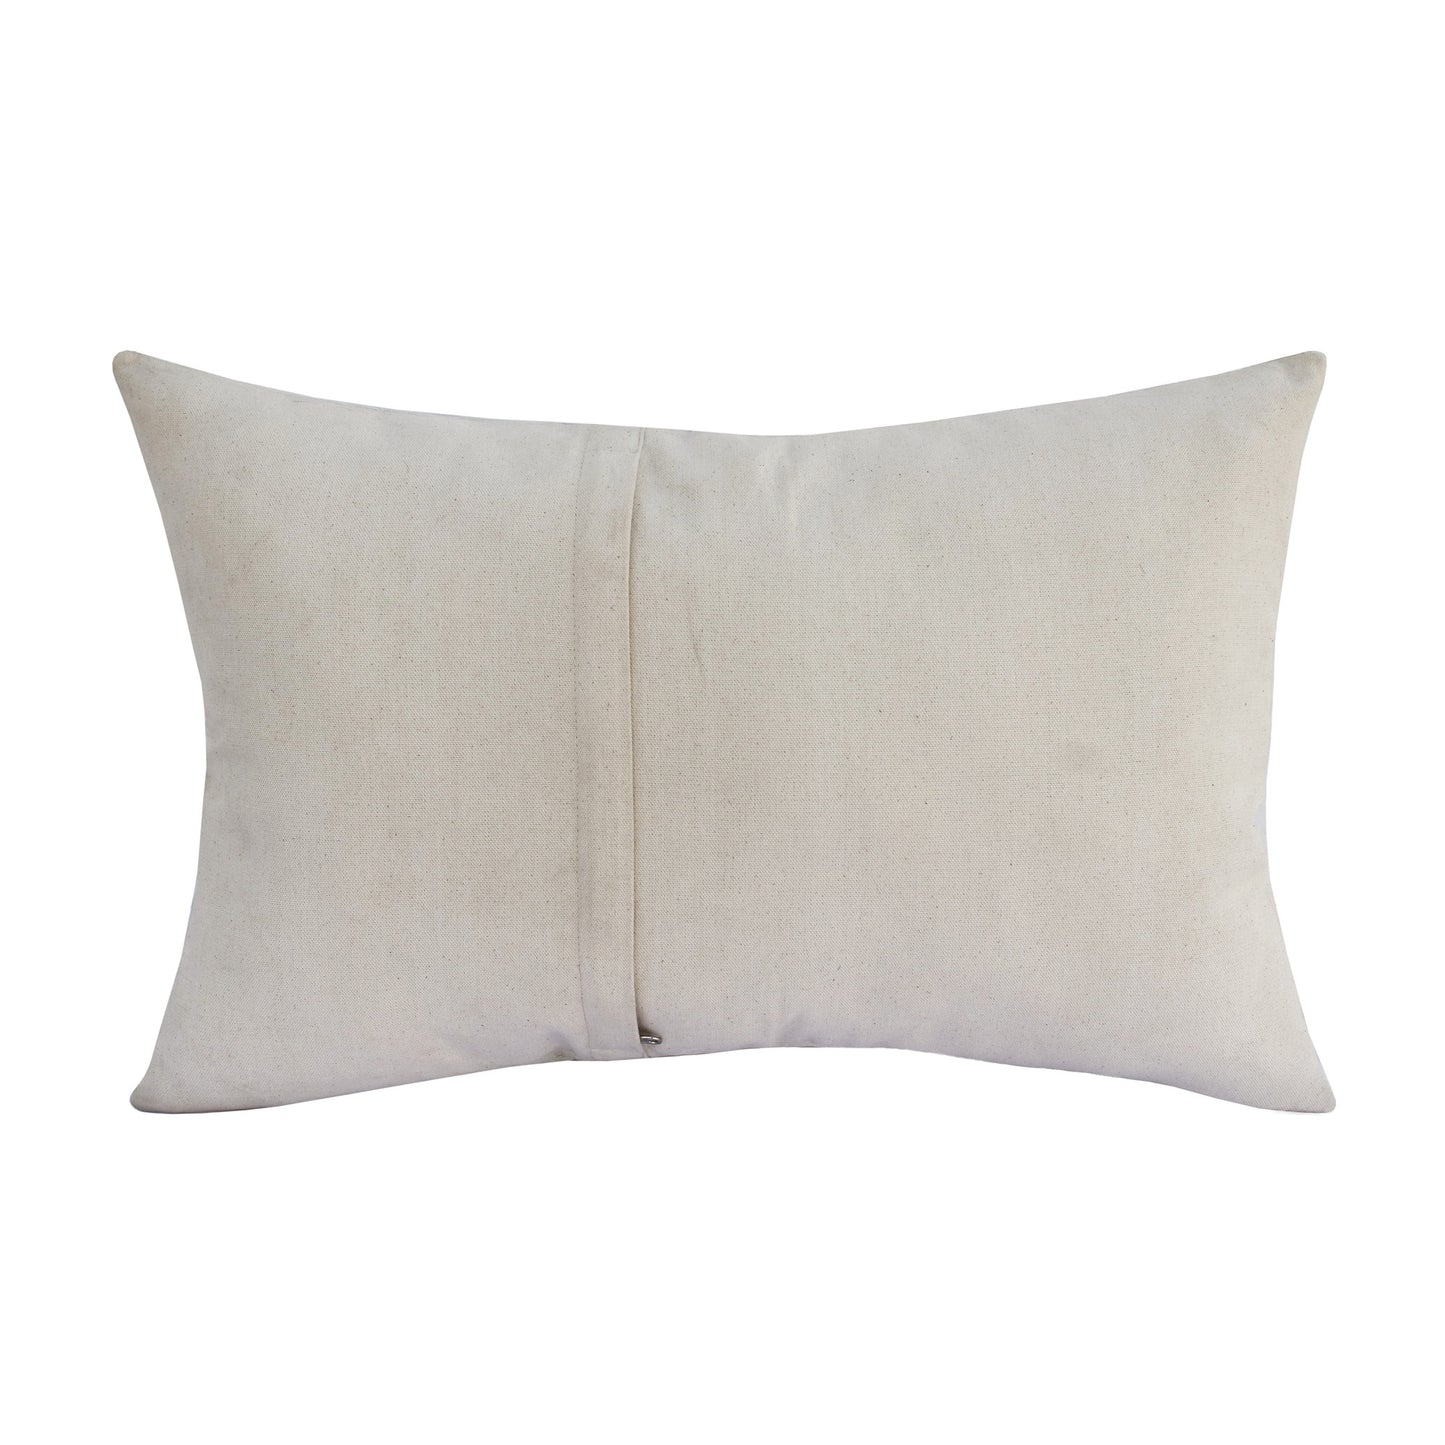 16" X 24" Ivory Patchwork Faux Leather Zippered Pillow